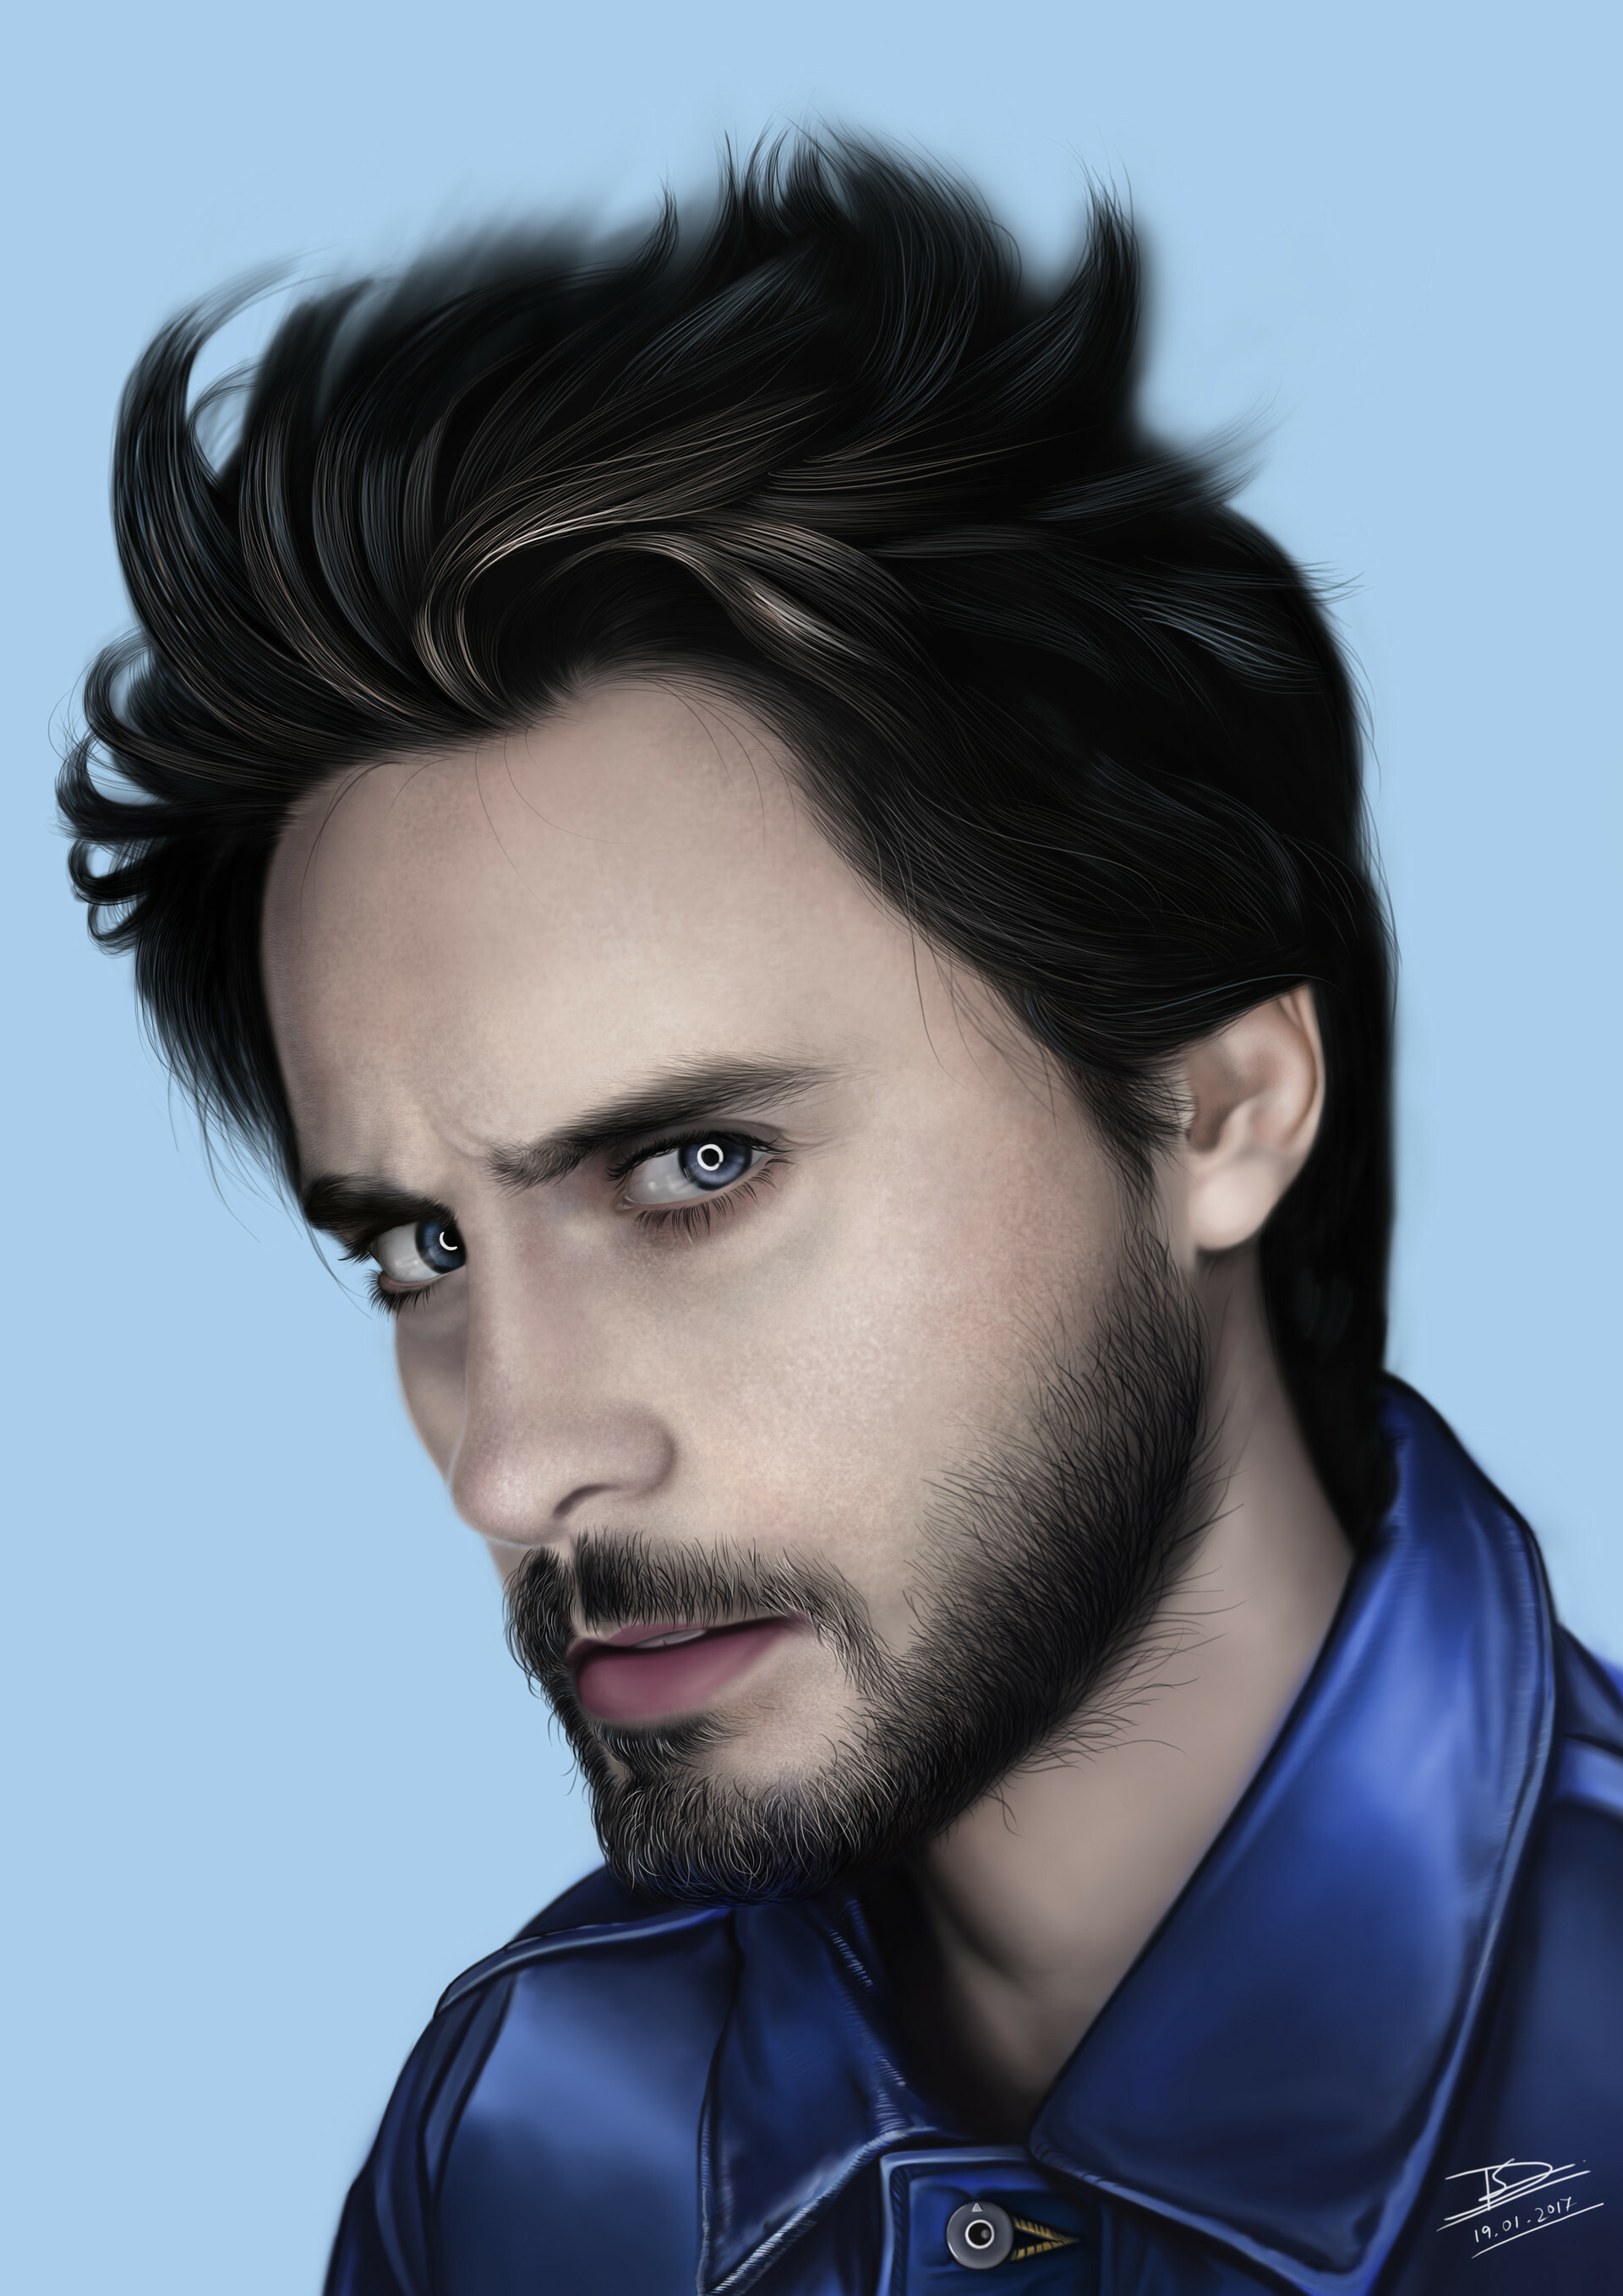 Jared Leto: An actor known for roles in the films 'Requiem for a Dream' and 'Dallas Buyers Club. 1920x2720 HD Background.